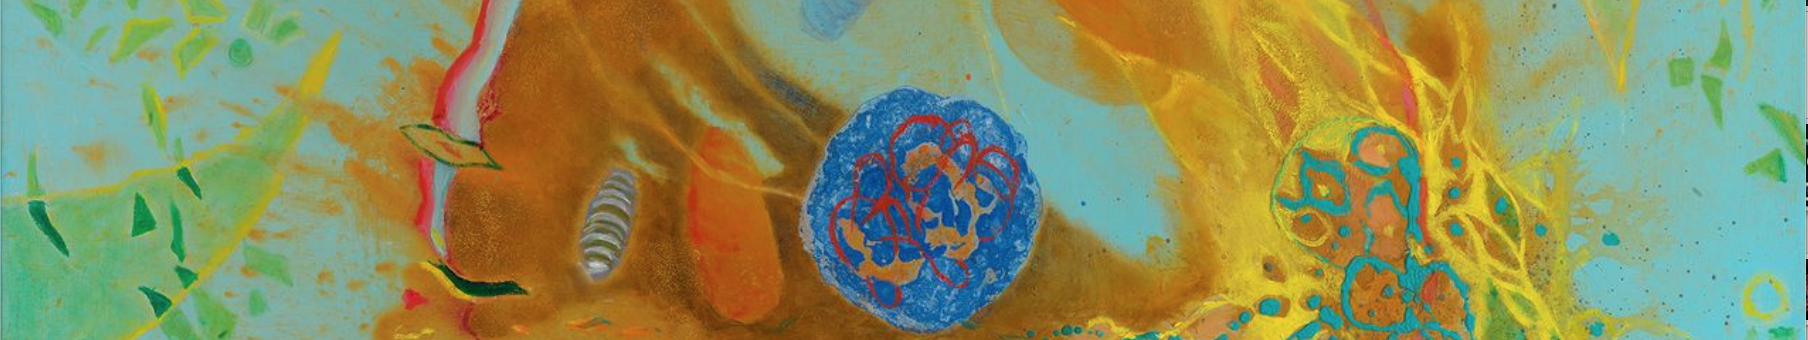 Working with cancer biologist Dhruba Deb, artist Caroline Ometz explored cancer’s effects on cells, including in this painting, Order to Chaos, which depicts a healthy cell (center) being attacked by a yellow cancer-shaped cell. (https://www.pnas.org/content/115/5/826#:~:text=Download%20figure)